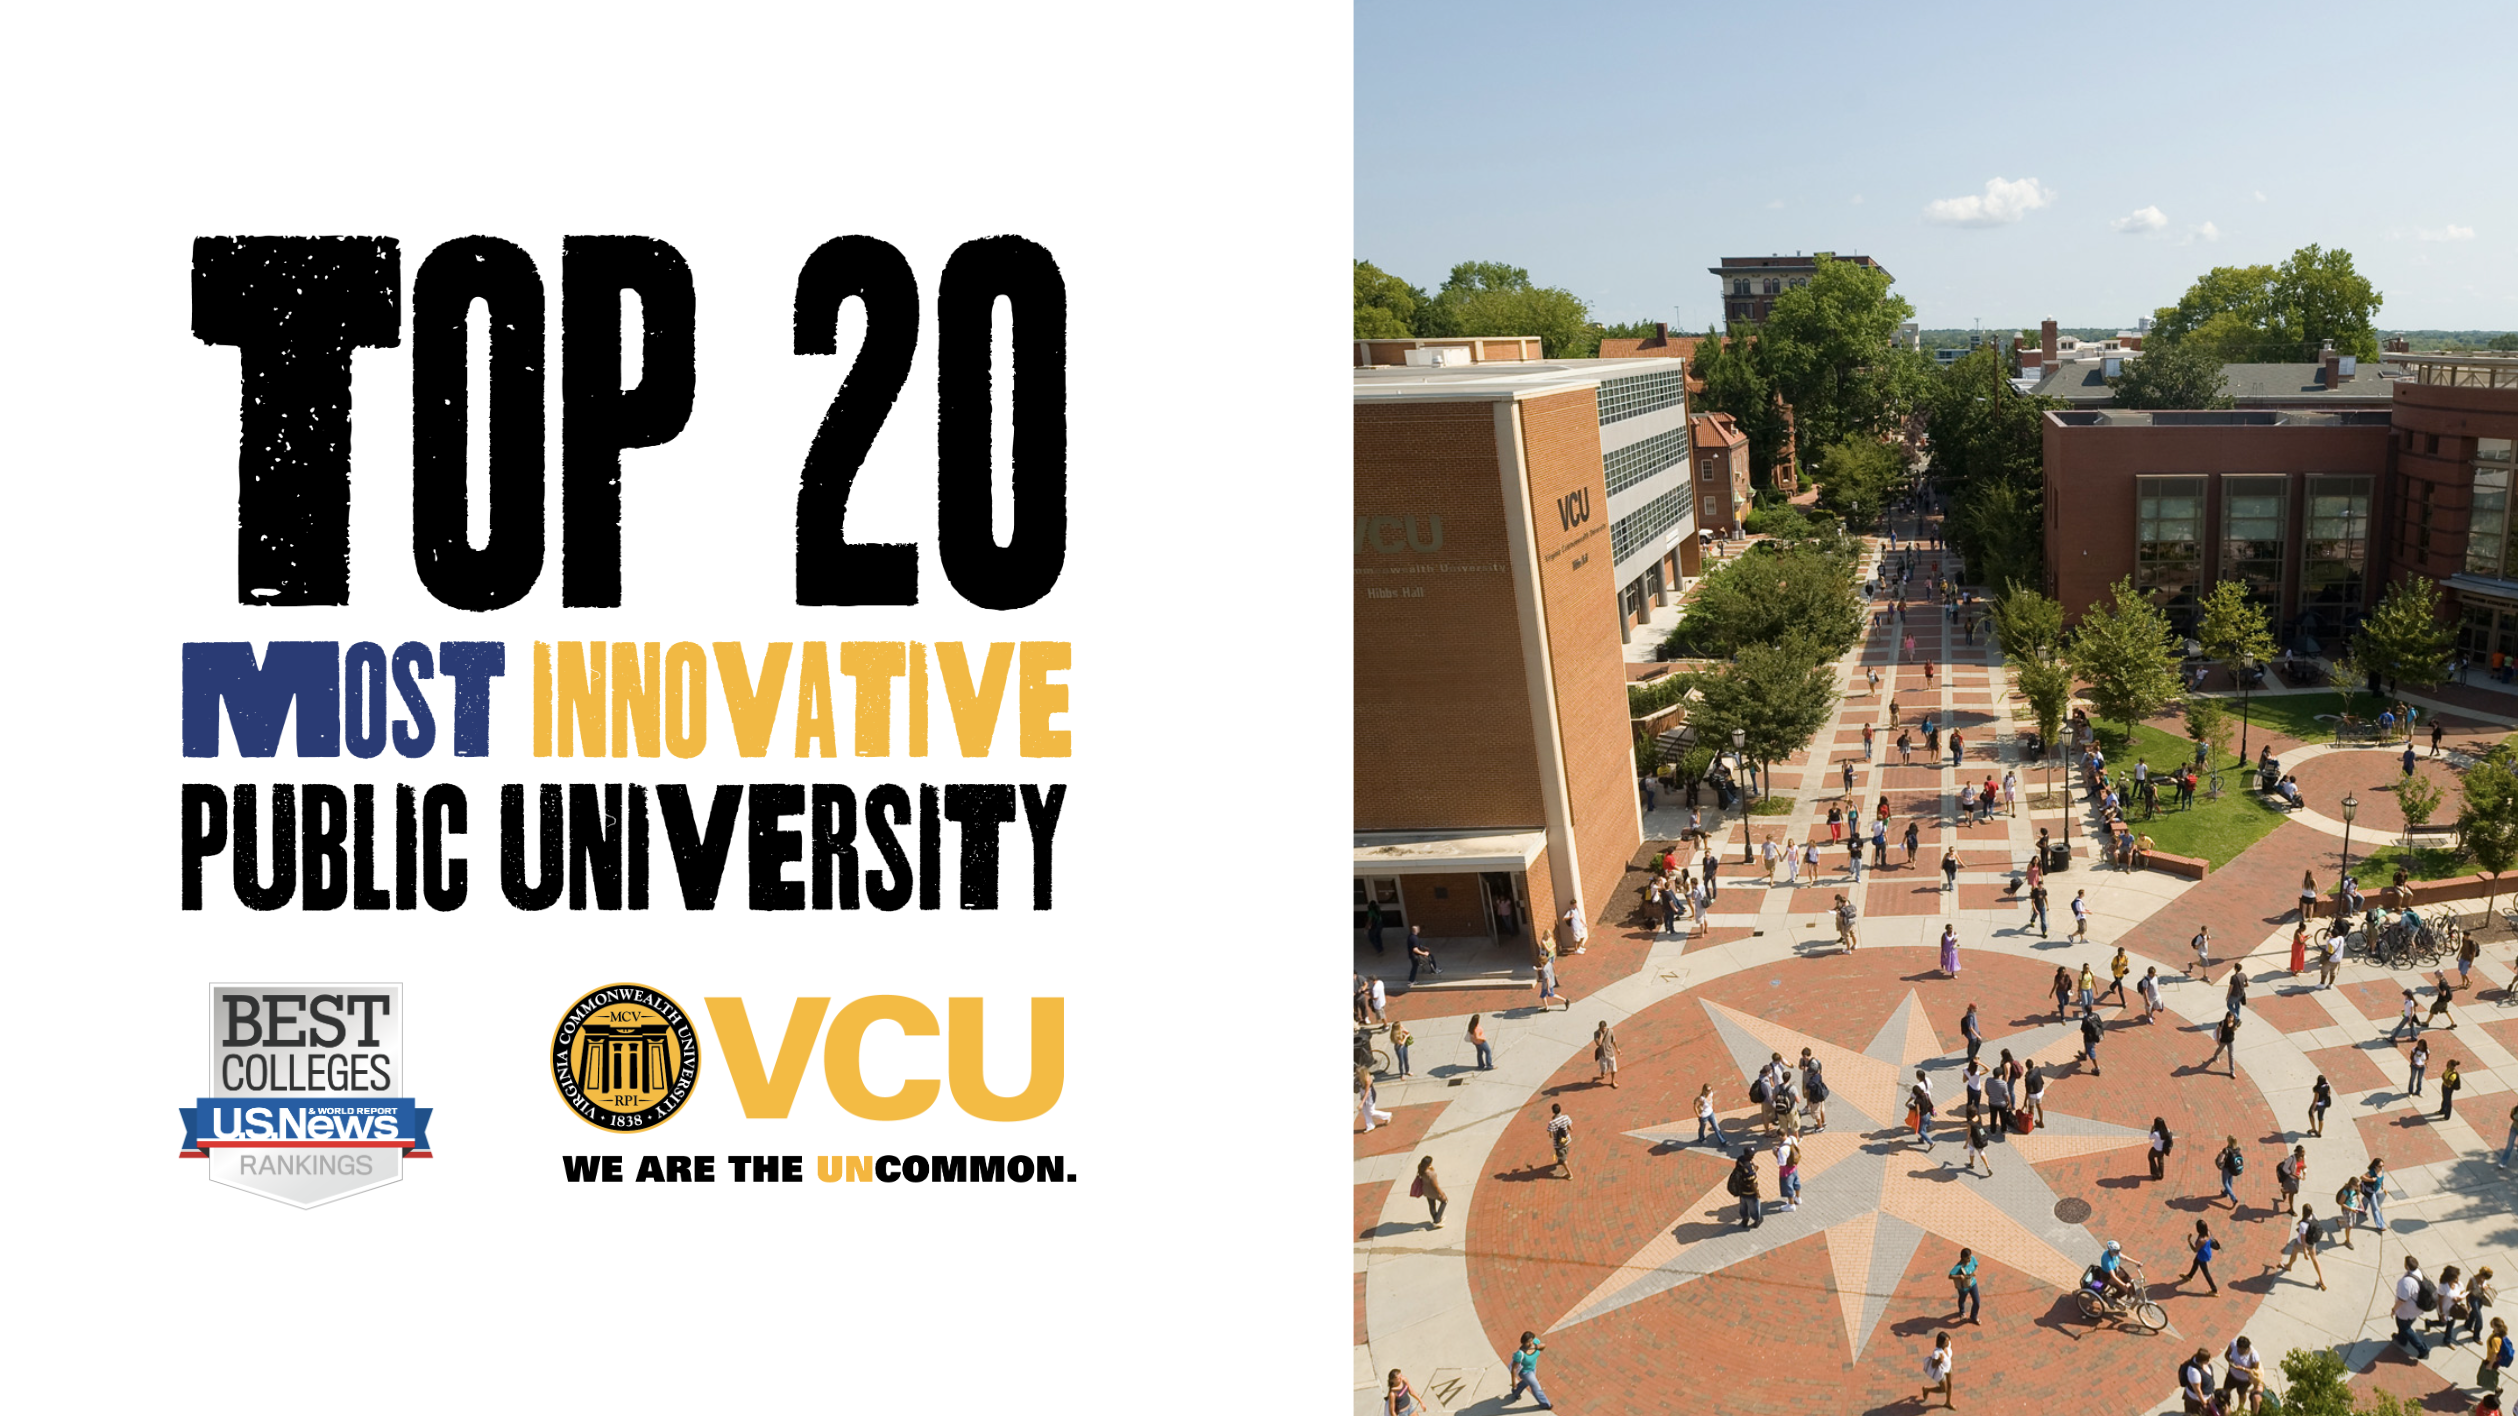 VCU has been ranked a Top 20 Most Innovative Public University by U.S. News World Report.